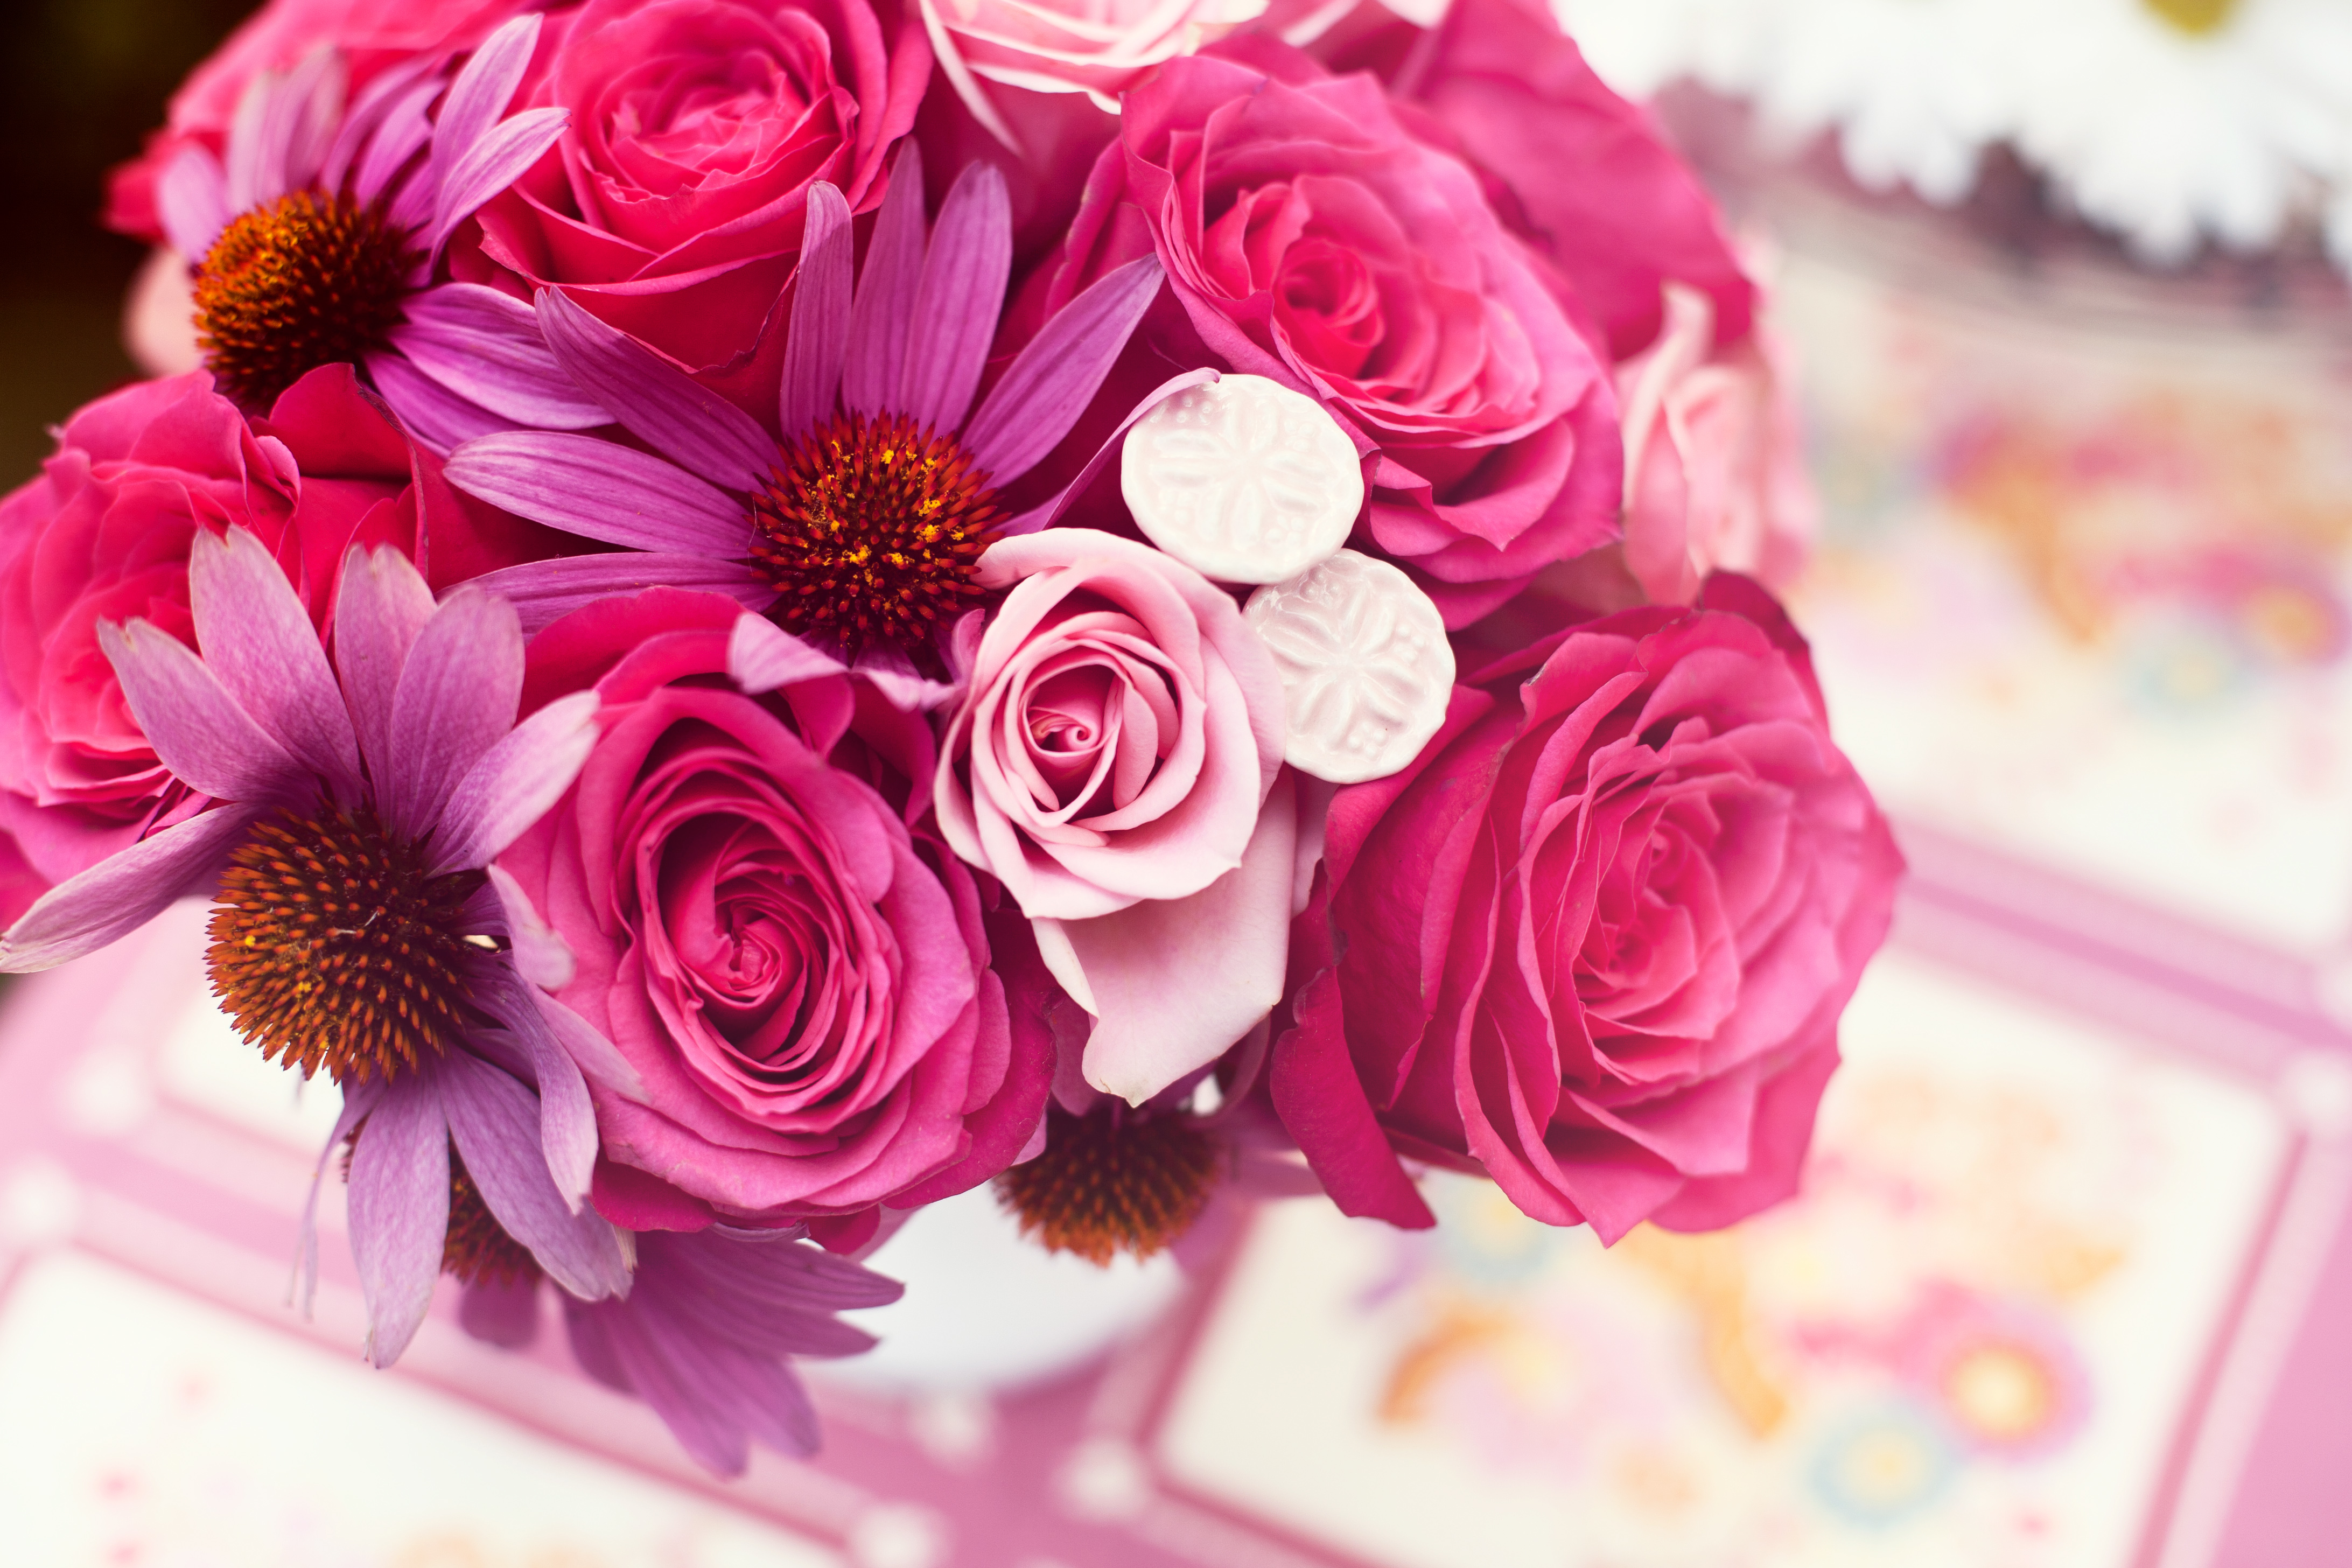 Flowers Image Pink HD Wallpaper And Background Photos